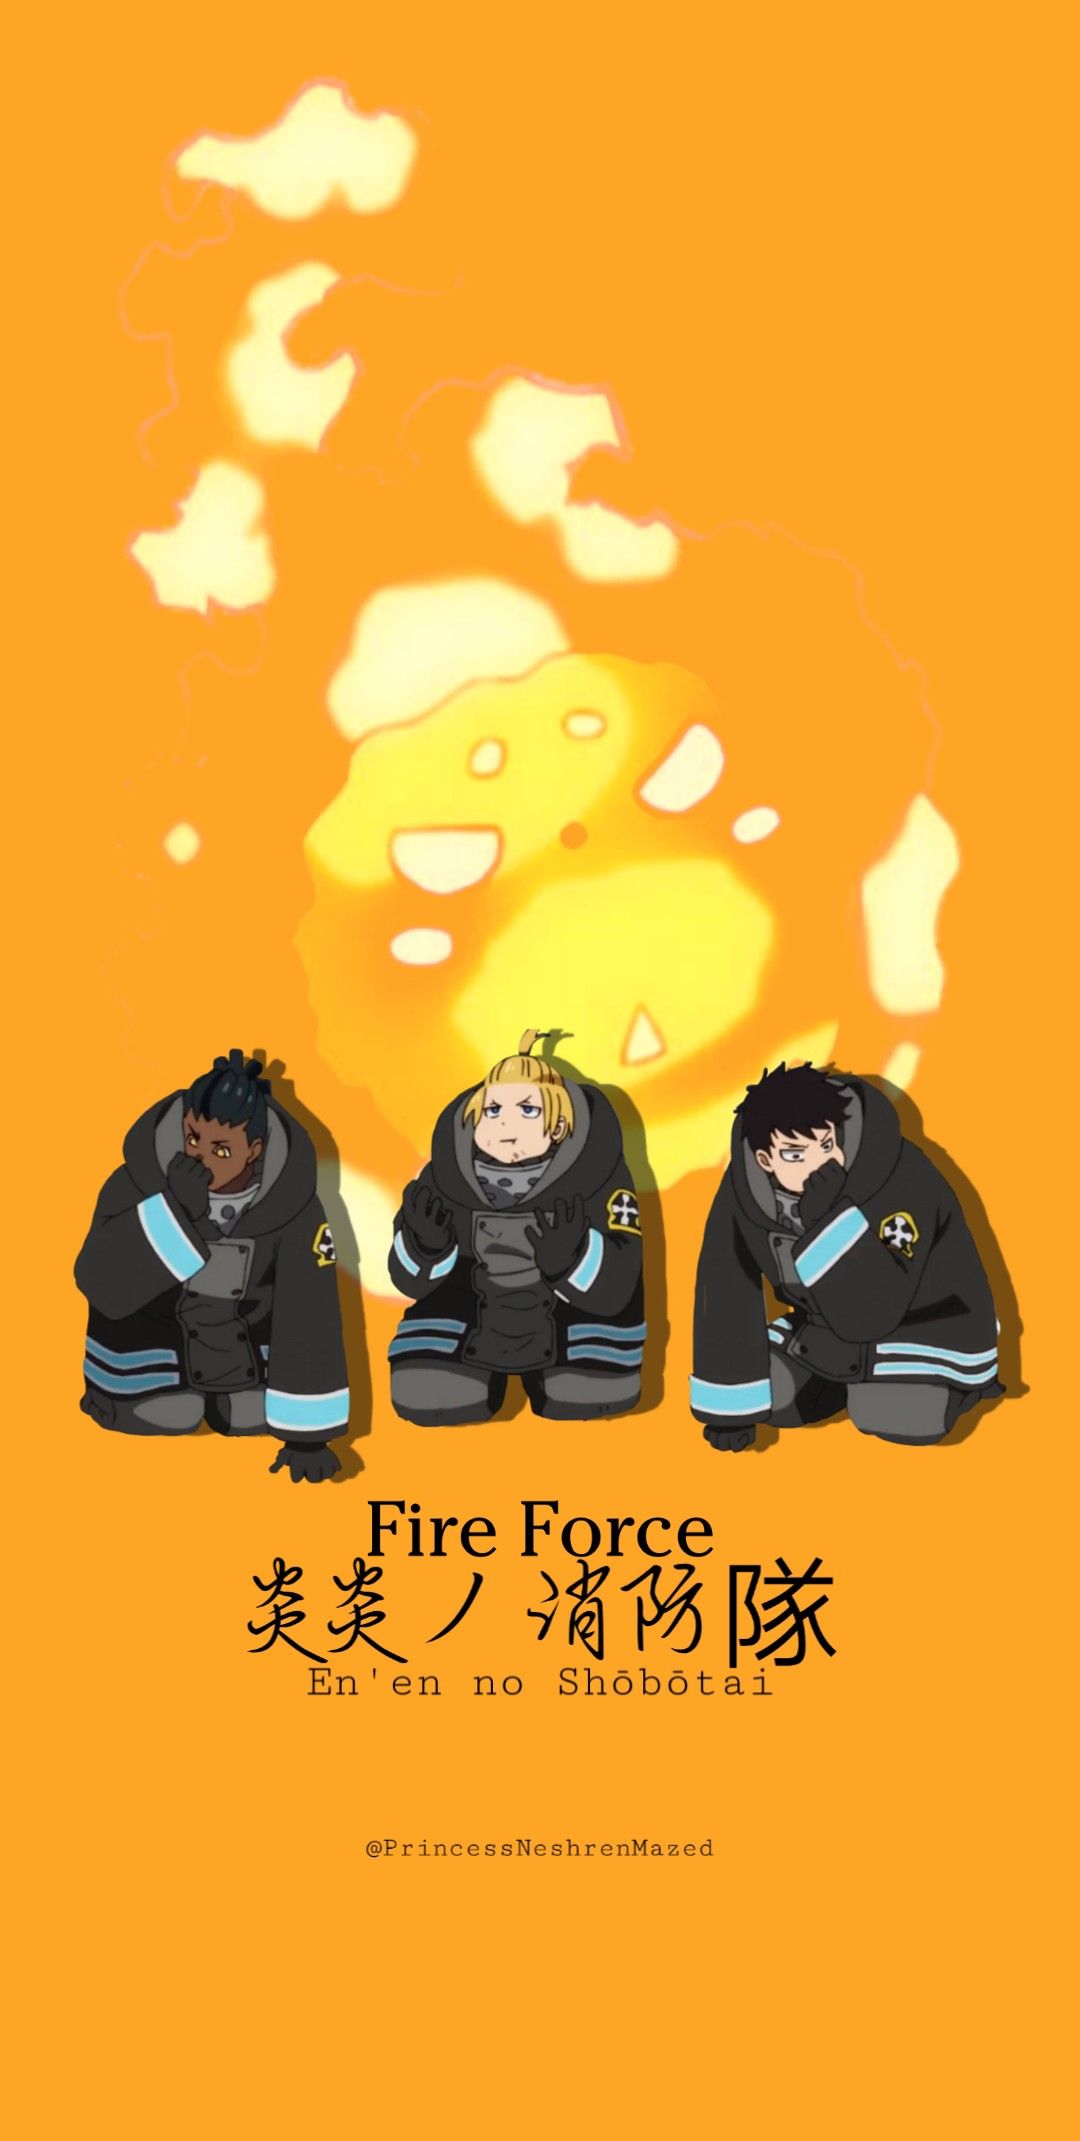 Fire force anime poster - Fire